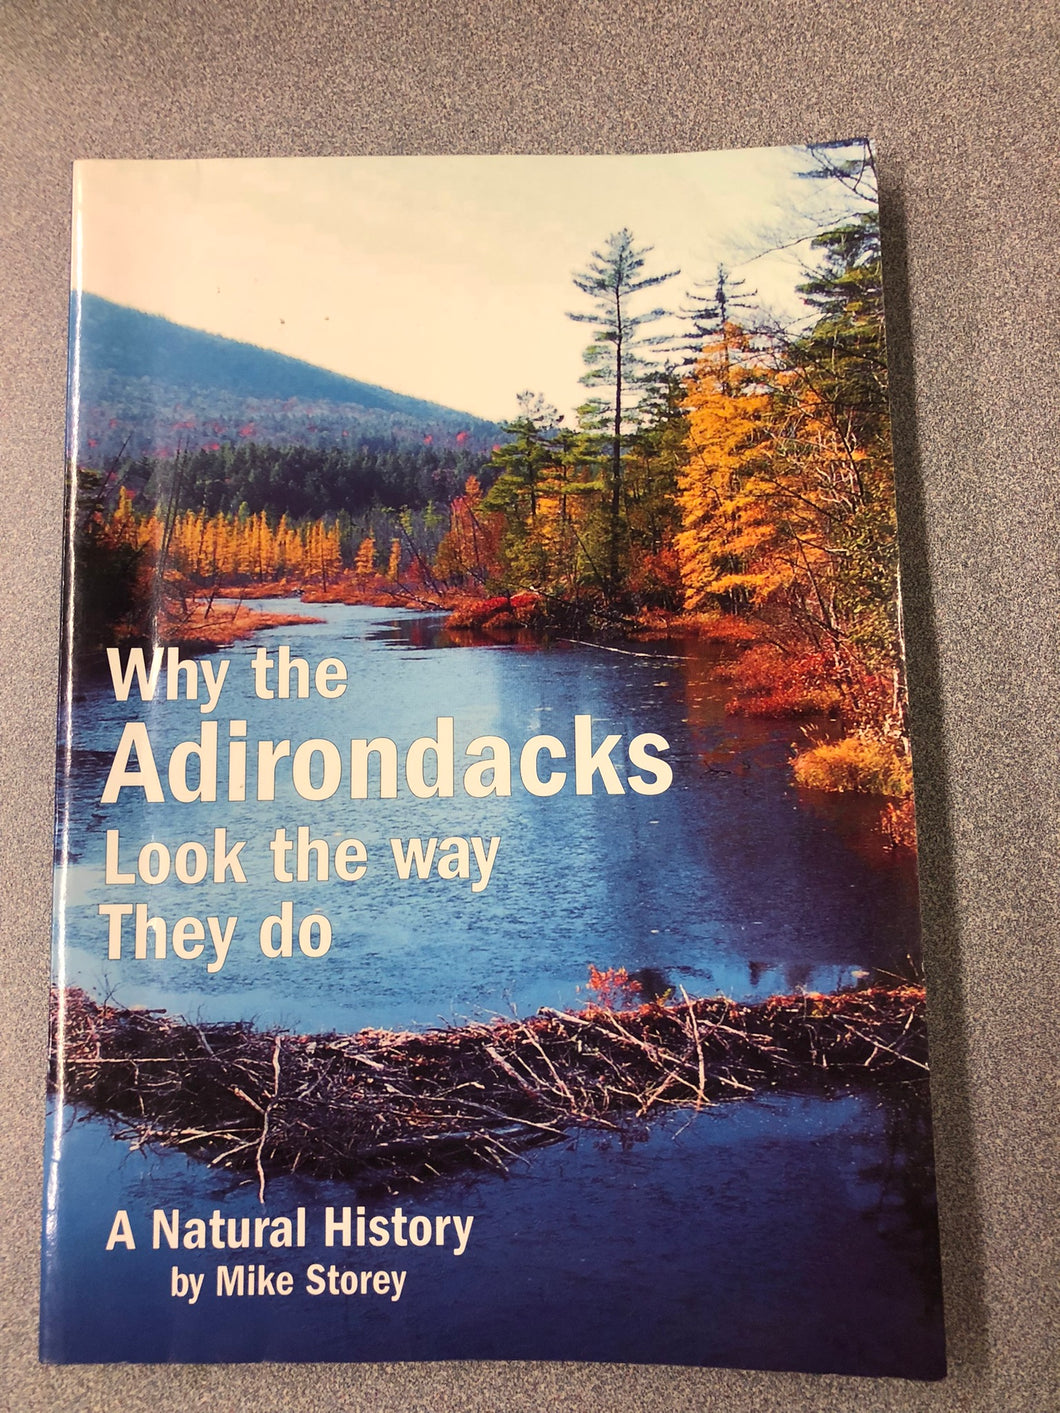 Why the Adirondacks Look the Way They Do: a Natural History, Storey, Mike [2006] OU 7/22